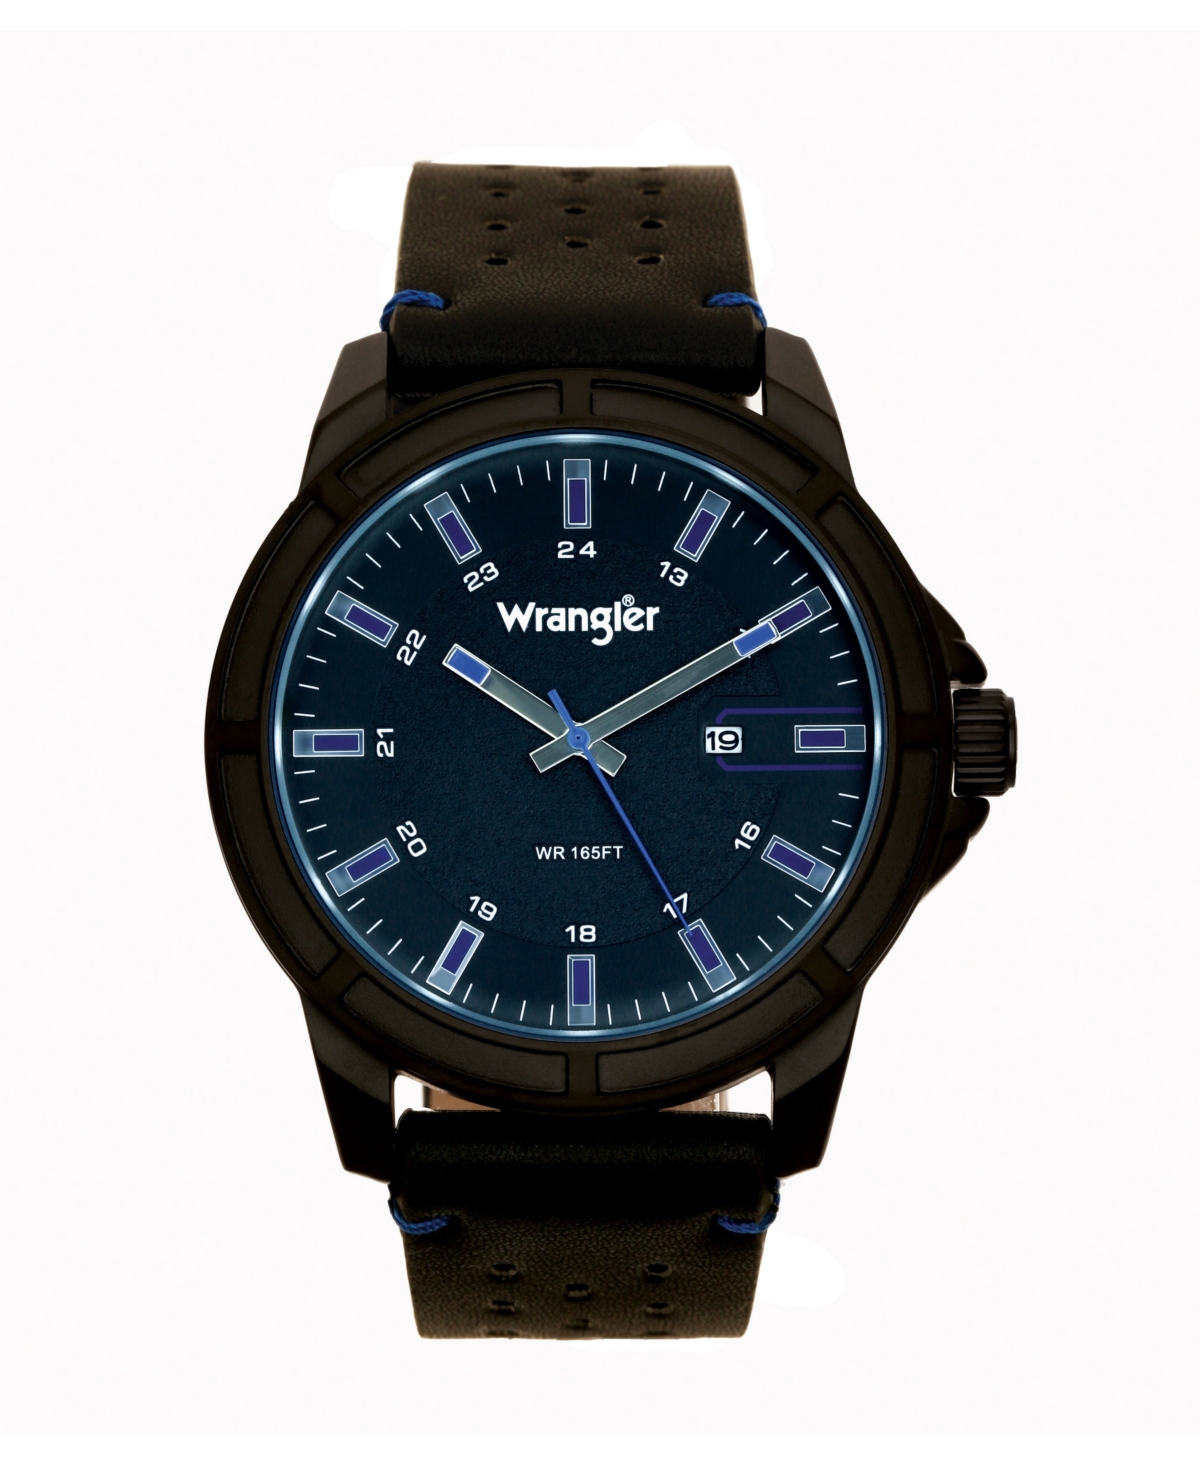 Men's Watch 48MM Ip Black Case with Black Dial, Blue Index Markers, Sand Satin Dial, Analog, Date Function, Blue Second Hand, Black Strap wit